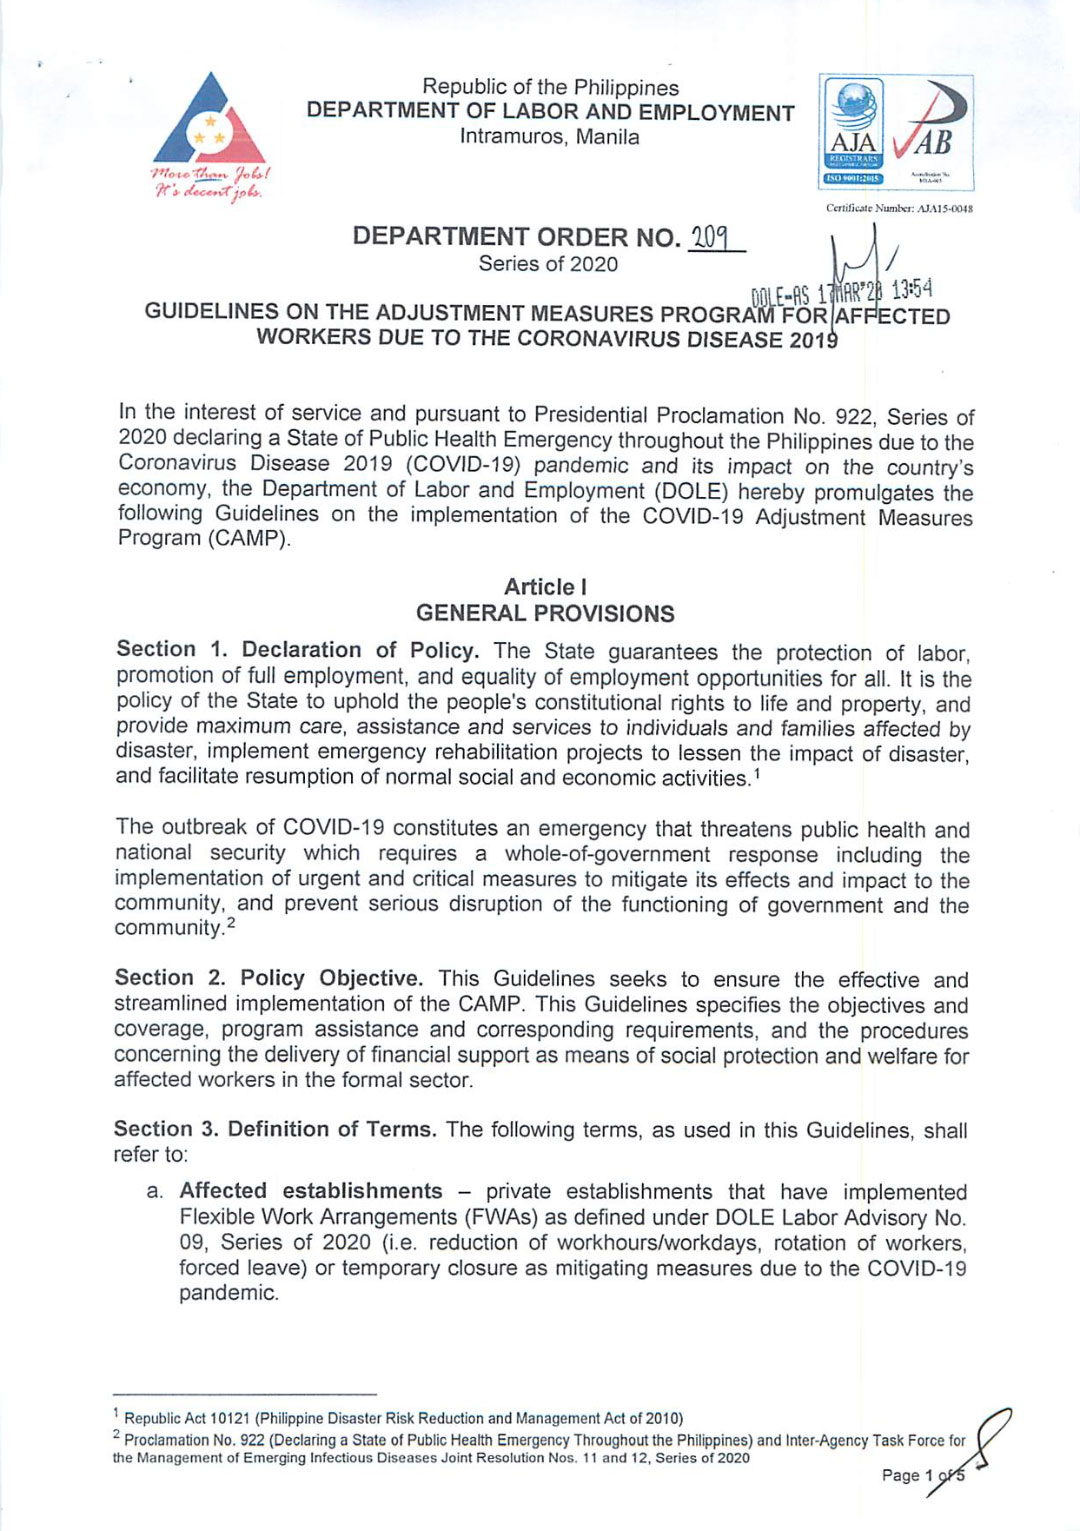 dole-department-order-209-page-01.jpg